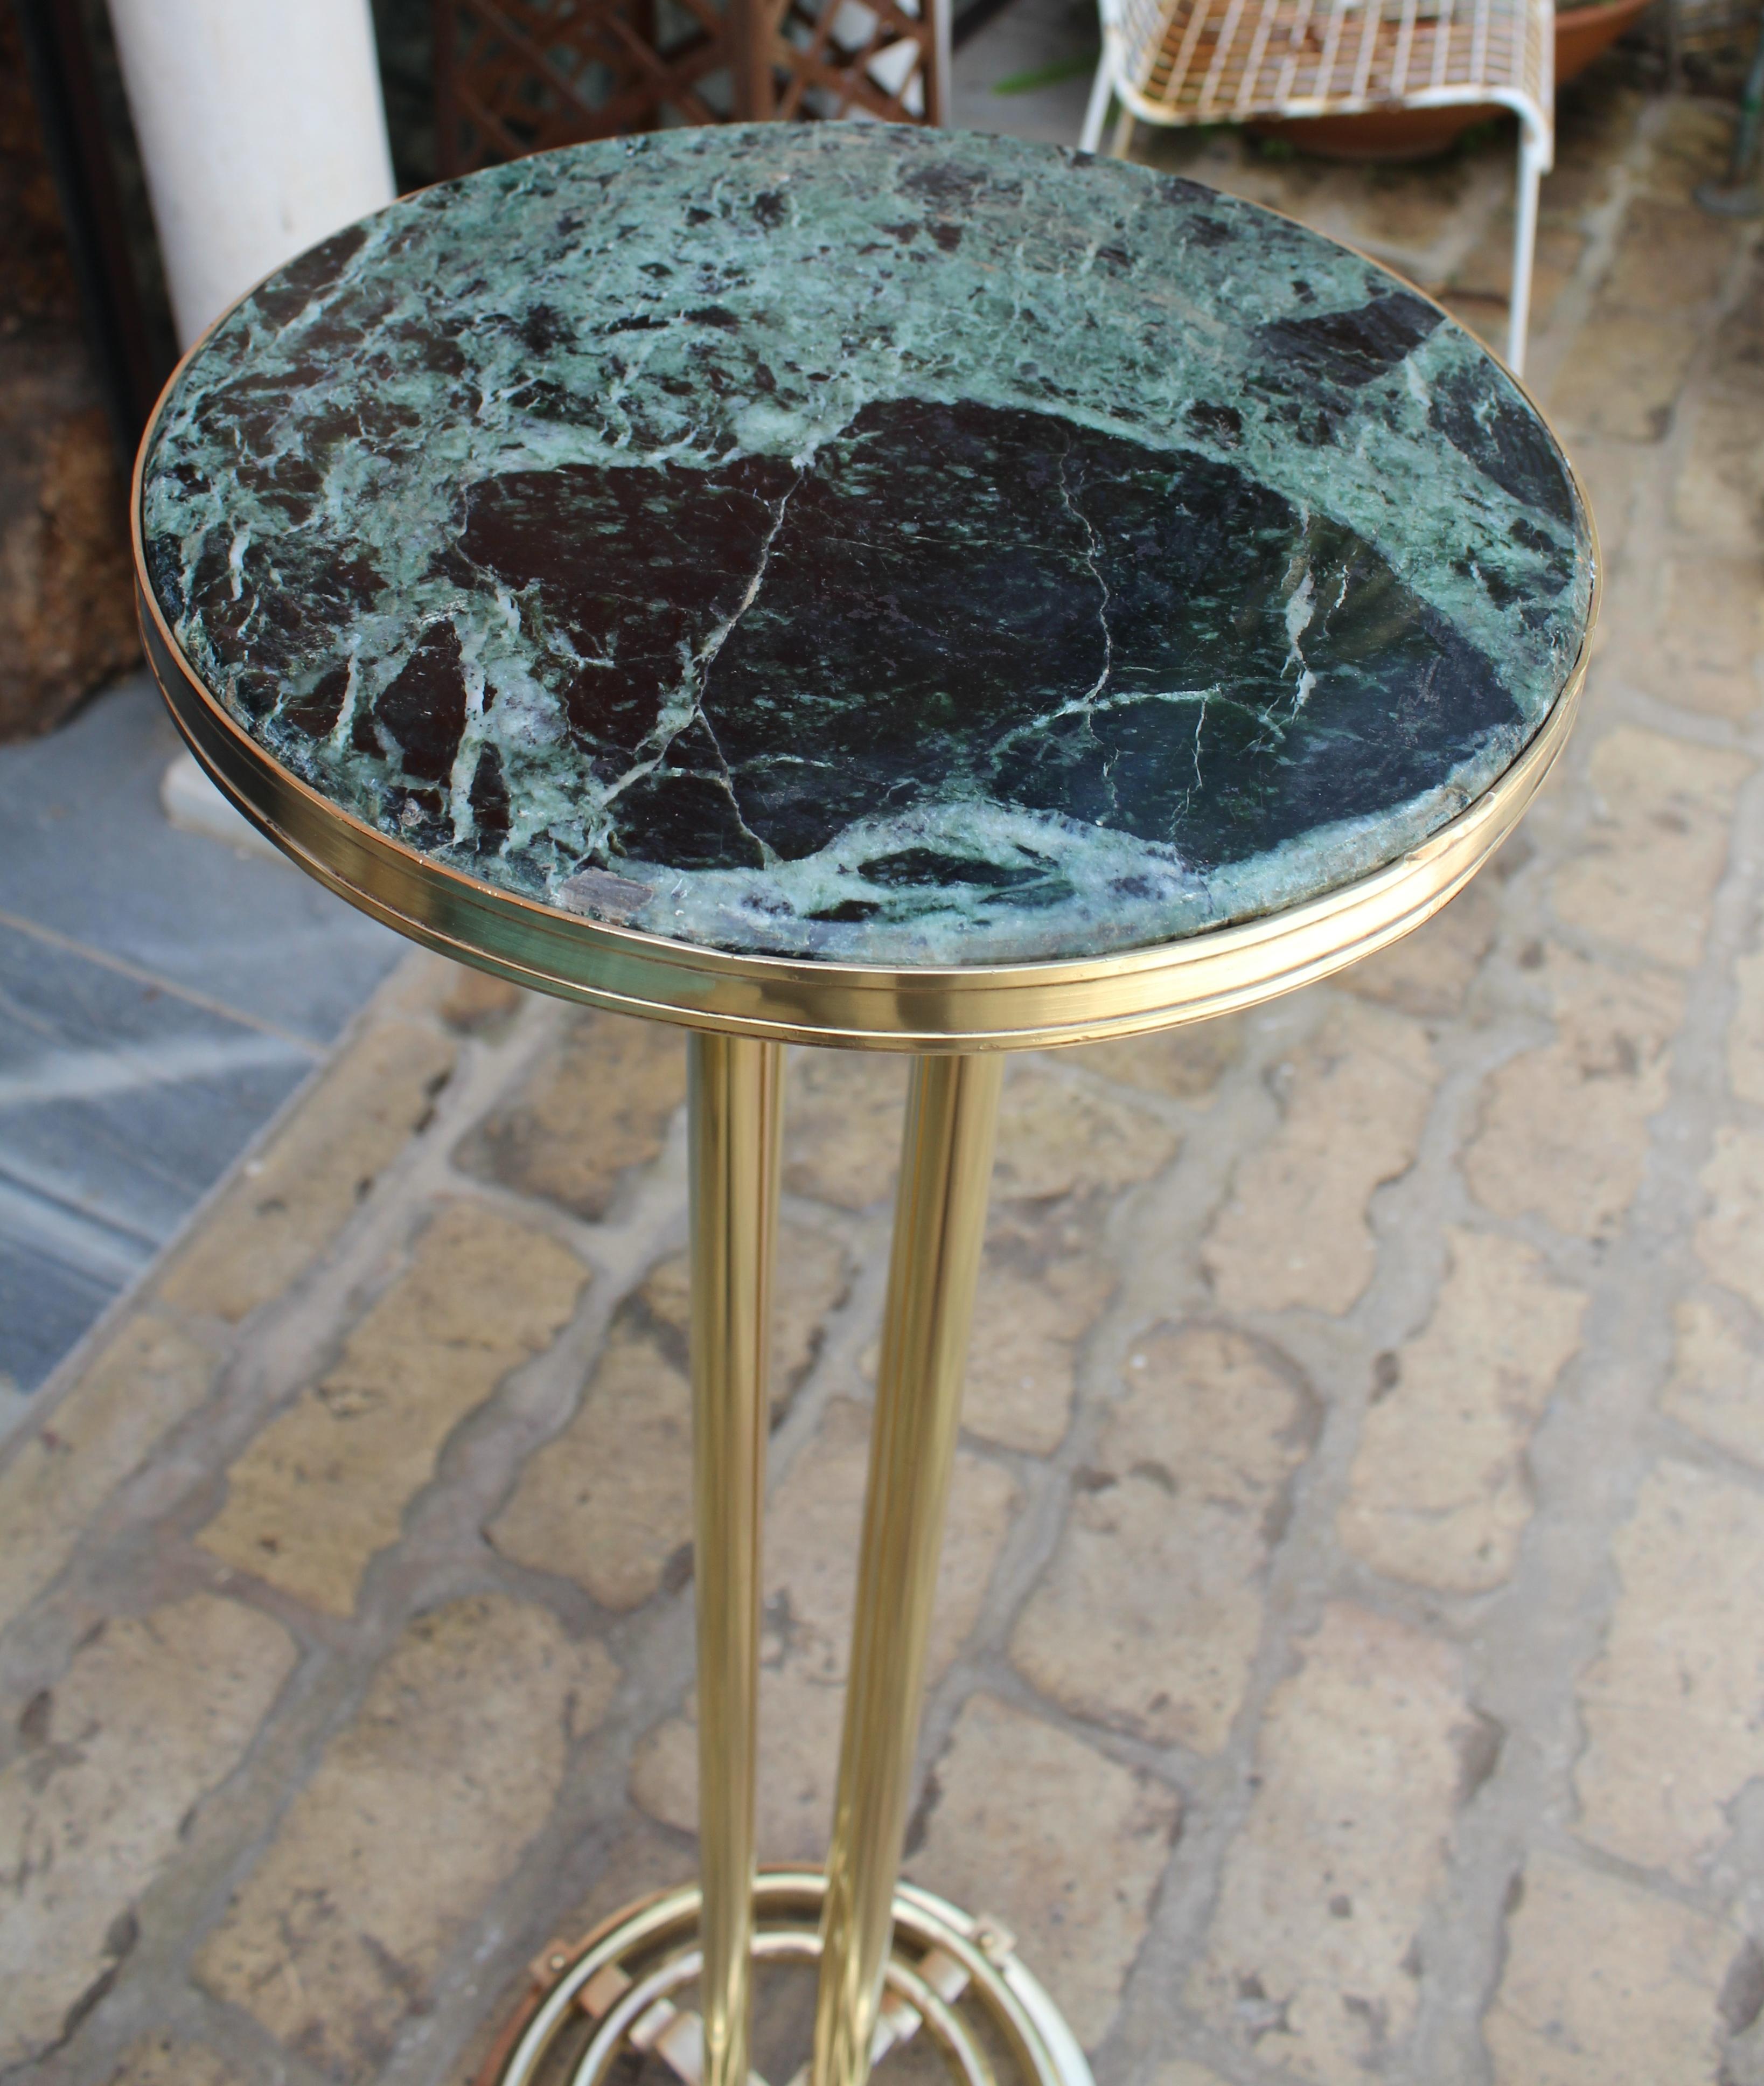 1970s Spanish gilded brass tall table with green serpentine marble top from renowned Marbella restaurant La Meridiana.
 